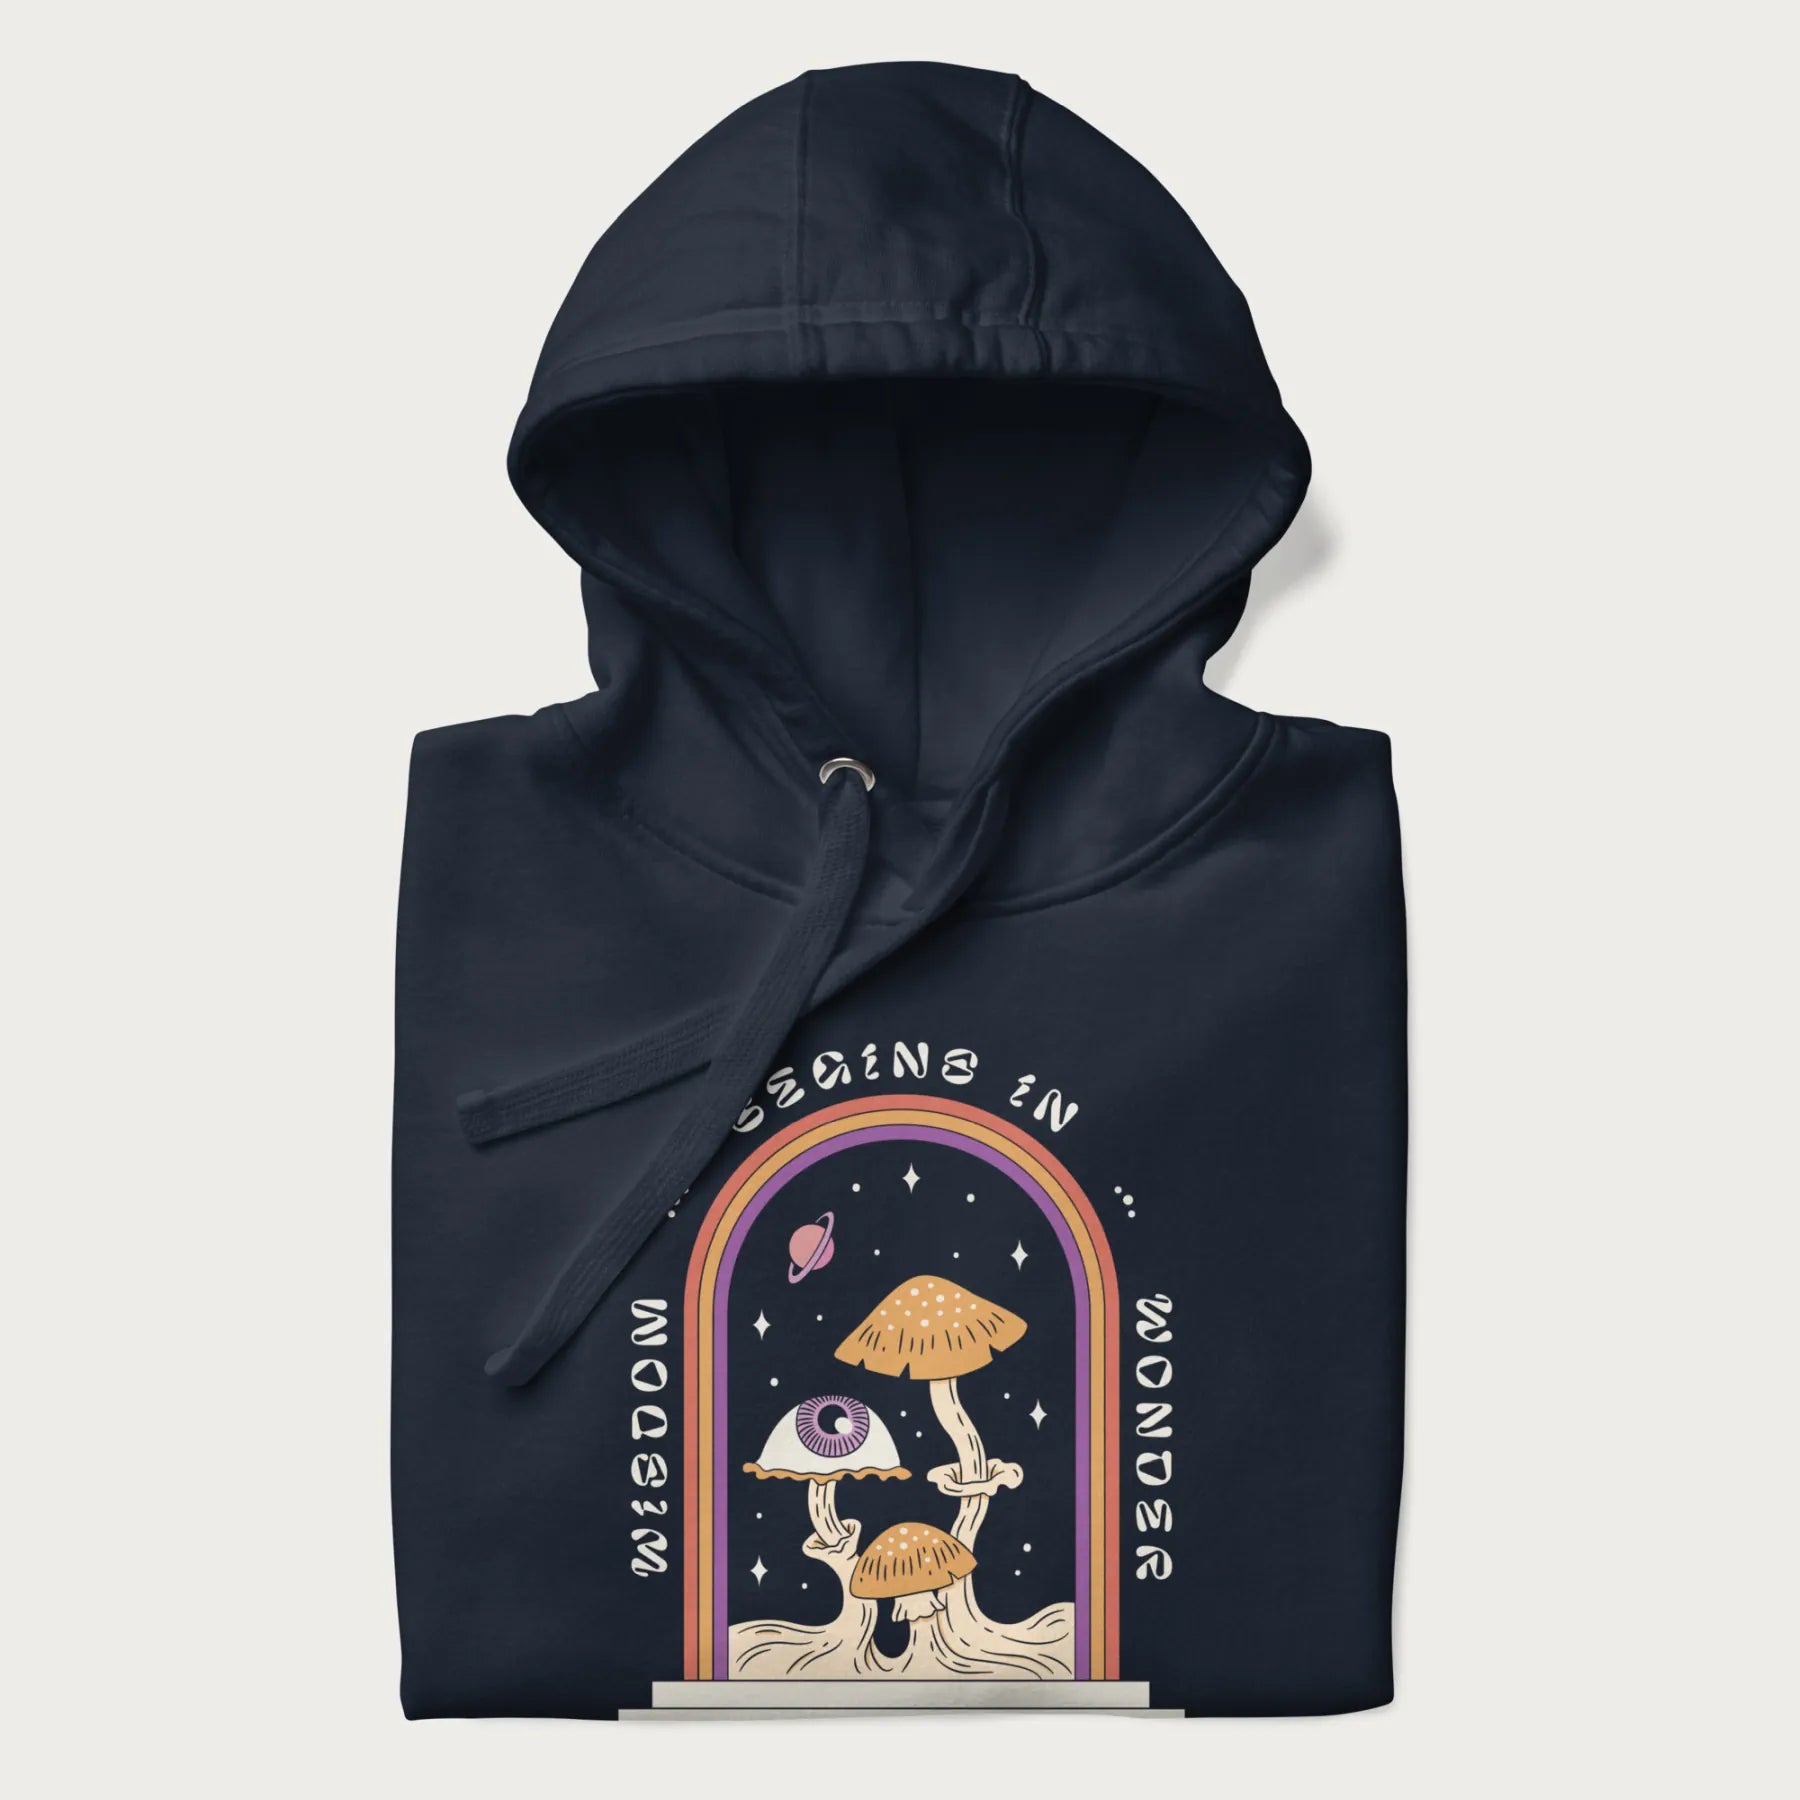 Folded navy blue hoodie with graphic of mystical mushrooms with an all-seeing eye and the text 'Wisdom Begins in Wonder' framed by a rainbow arch.